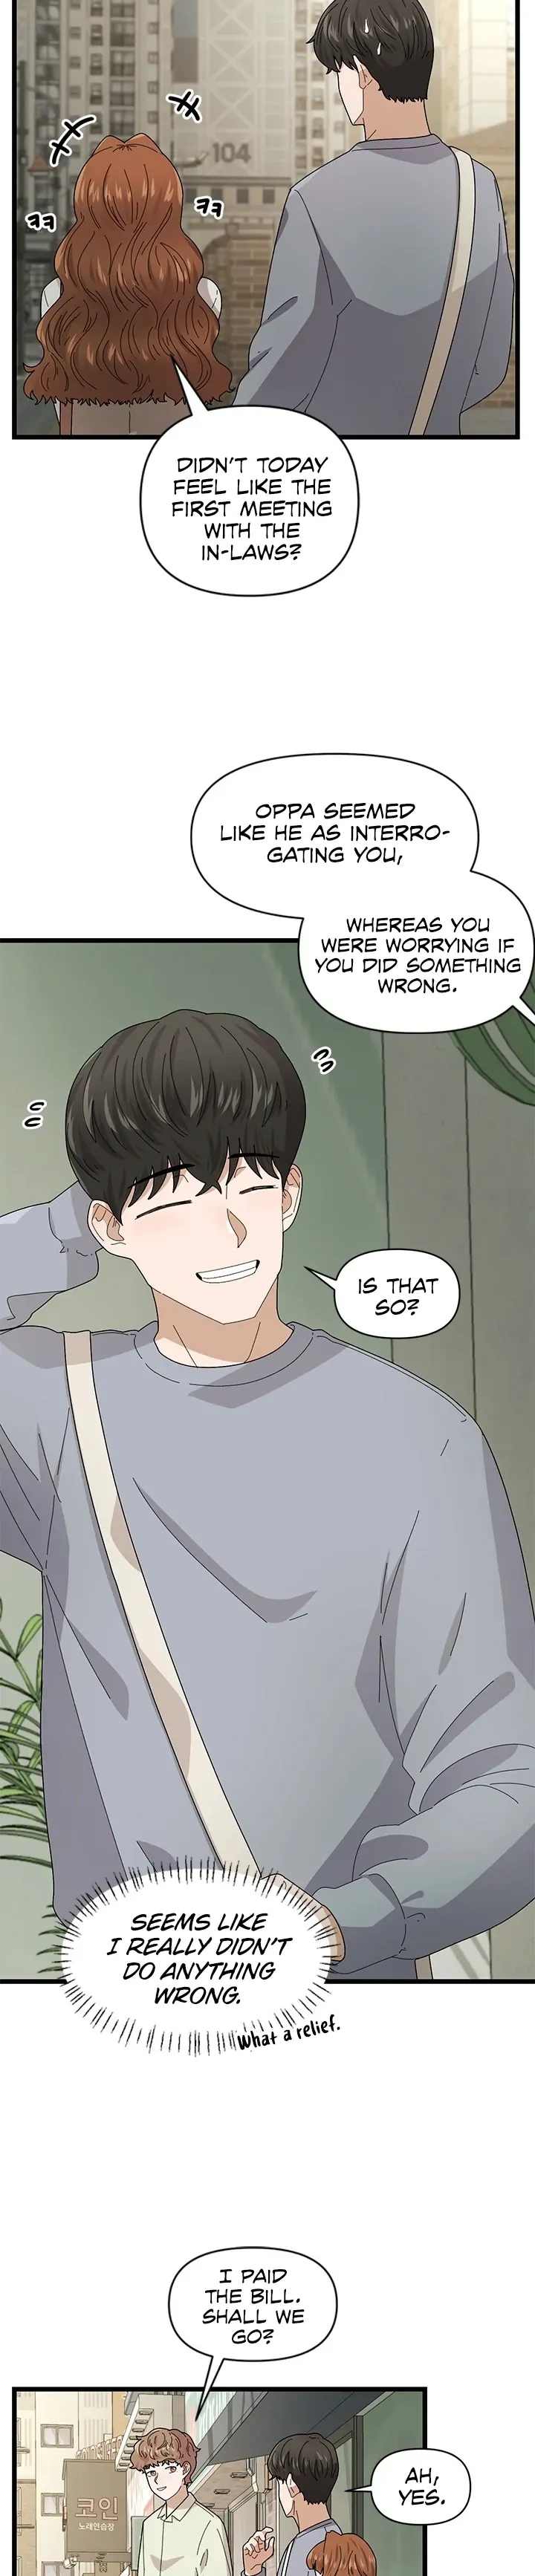 Sigeup Yeonae Chapter 19 - Page 6